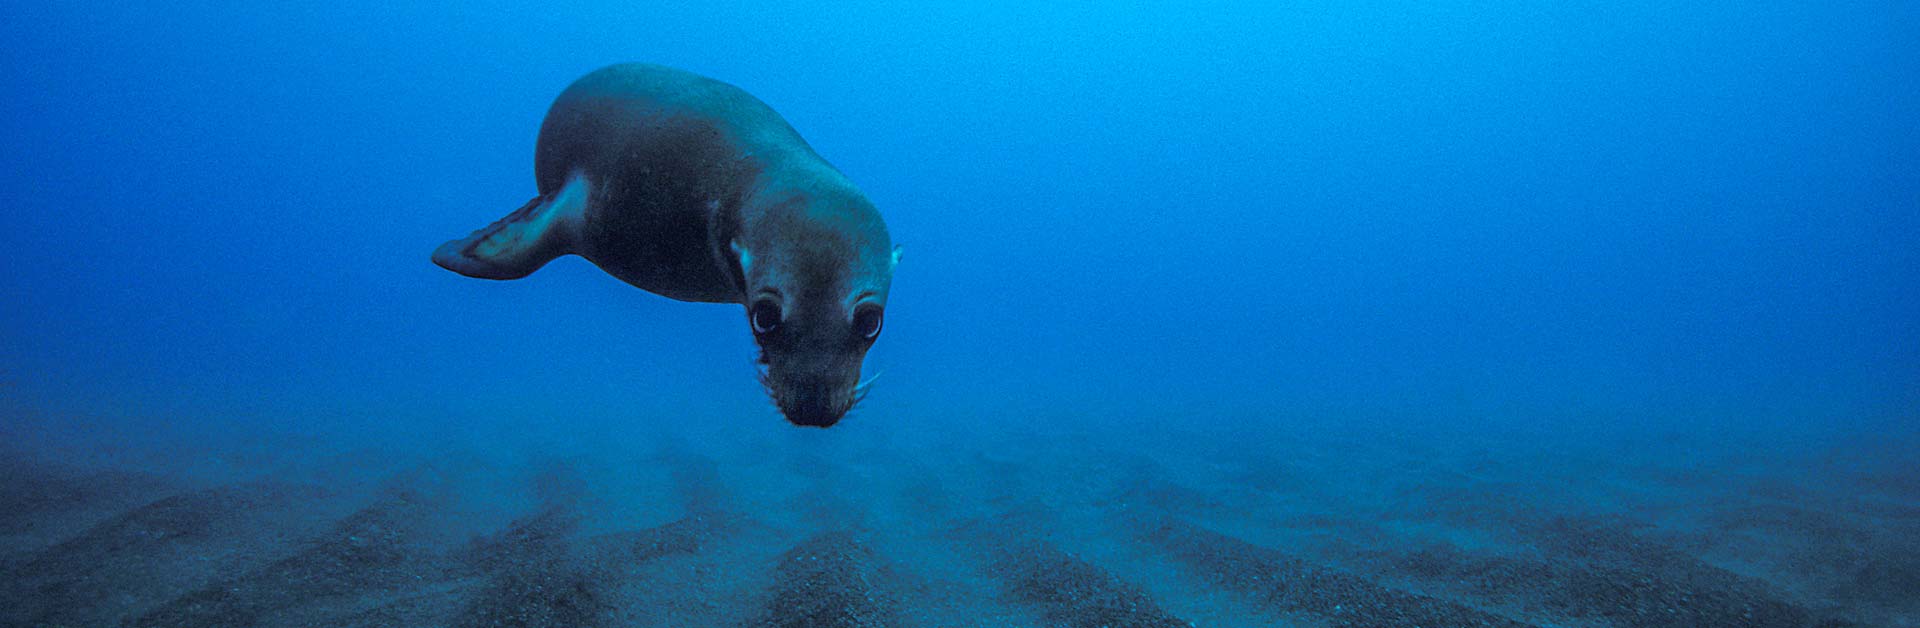 A seal happily swimming underwater in the ocean.